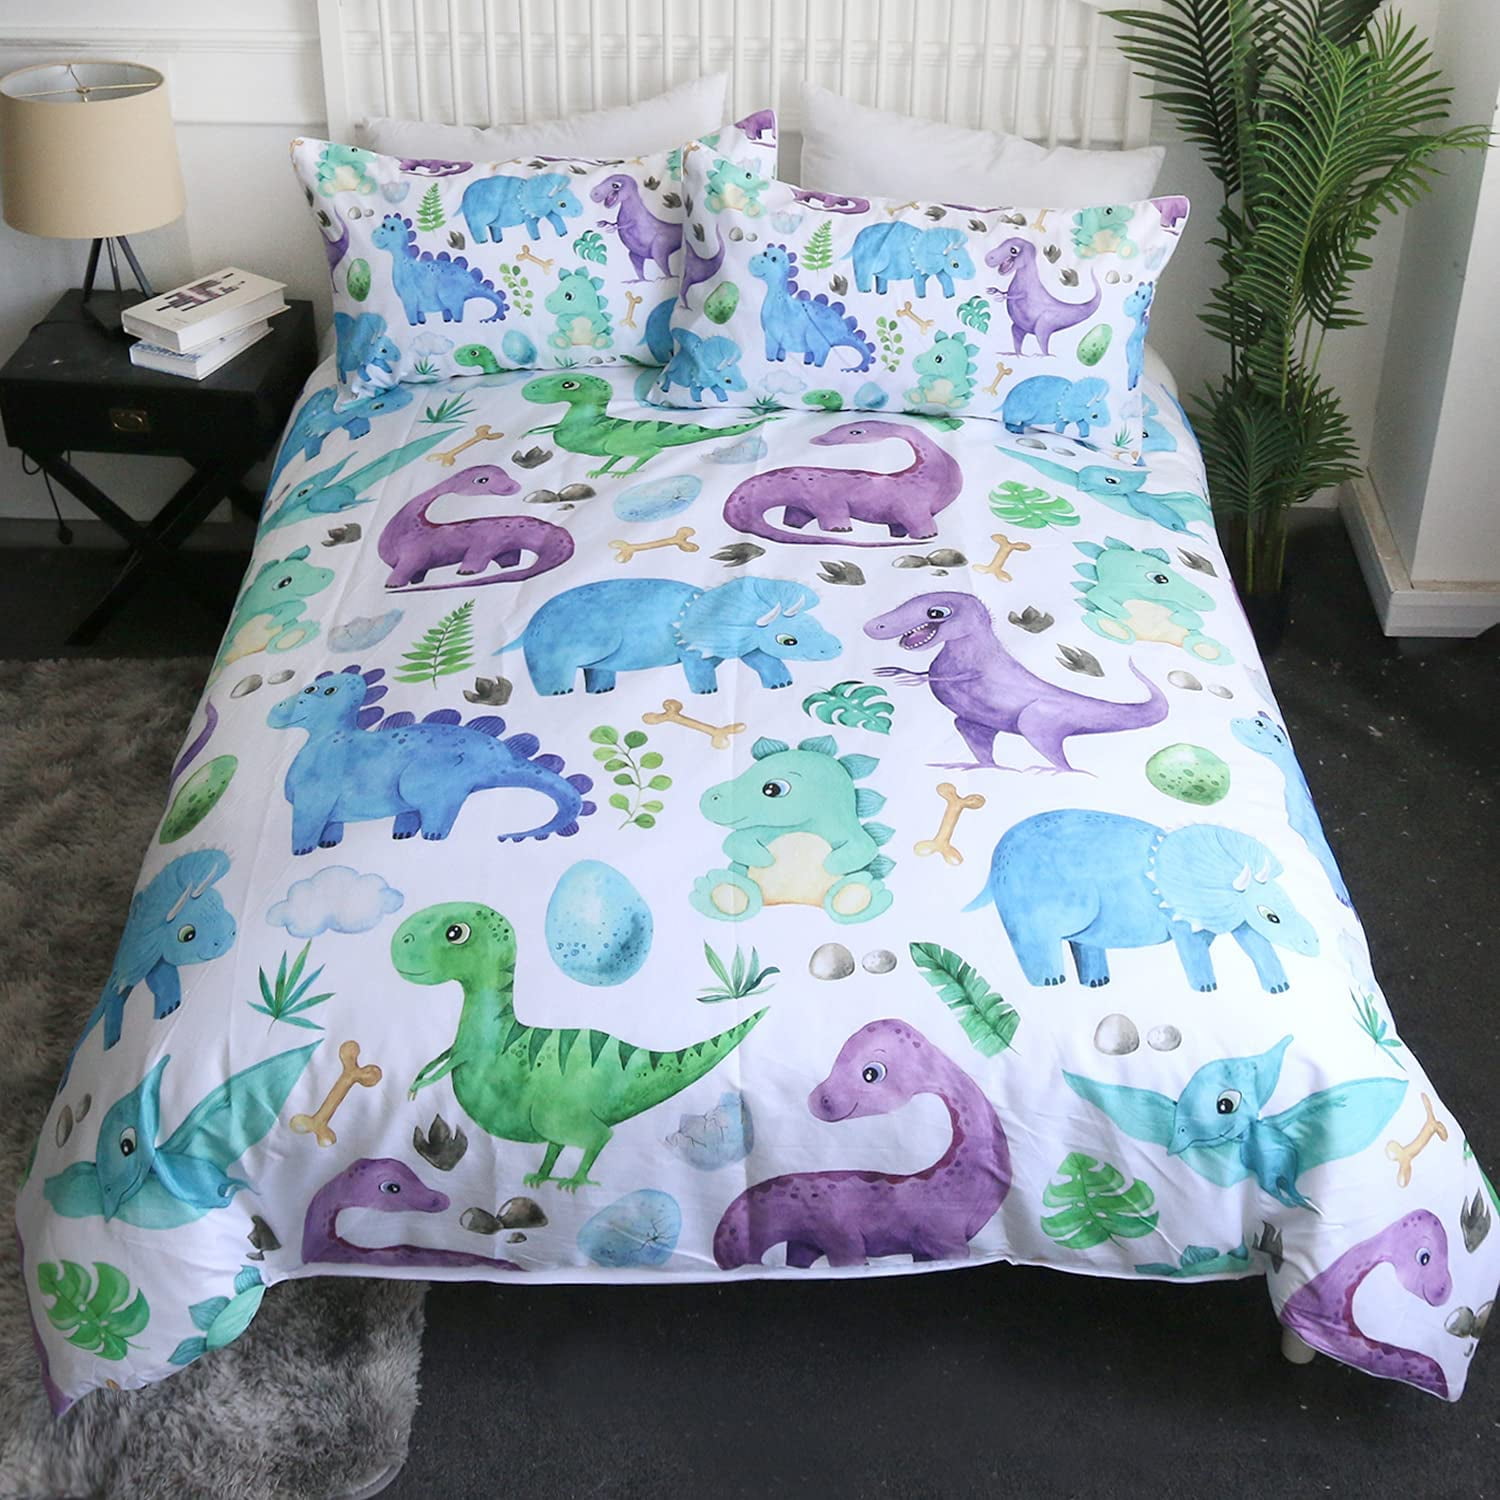 Full Dinosaur Bedding Set 3 Piece Watercolor Cartoon Dino Duvet Cover And  Pillowcases Pastel Blue Purple And Green Kids Boys Soft Bed Set -  